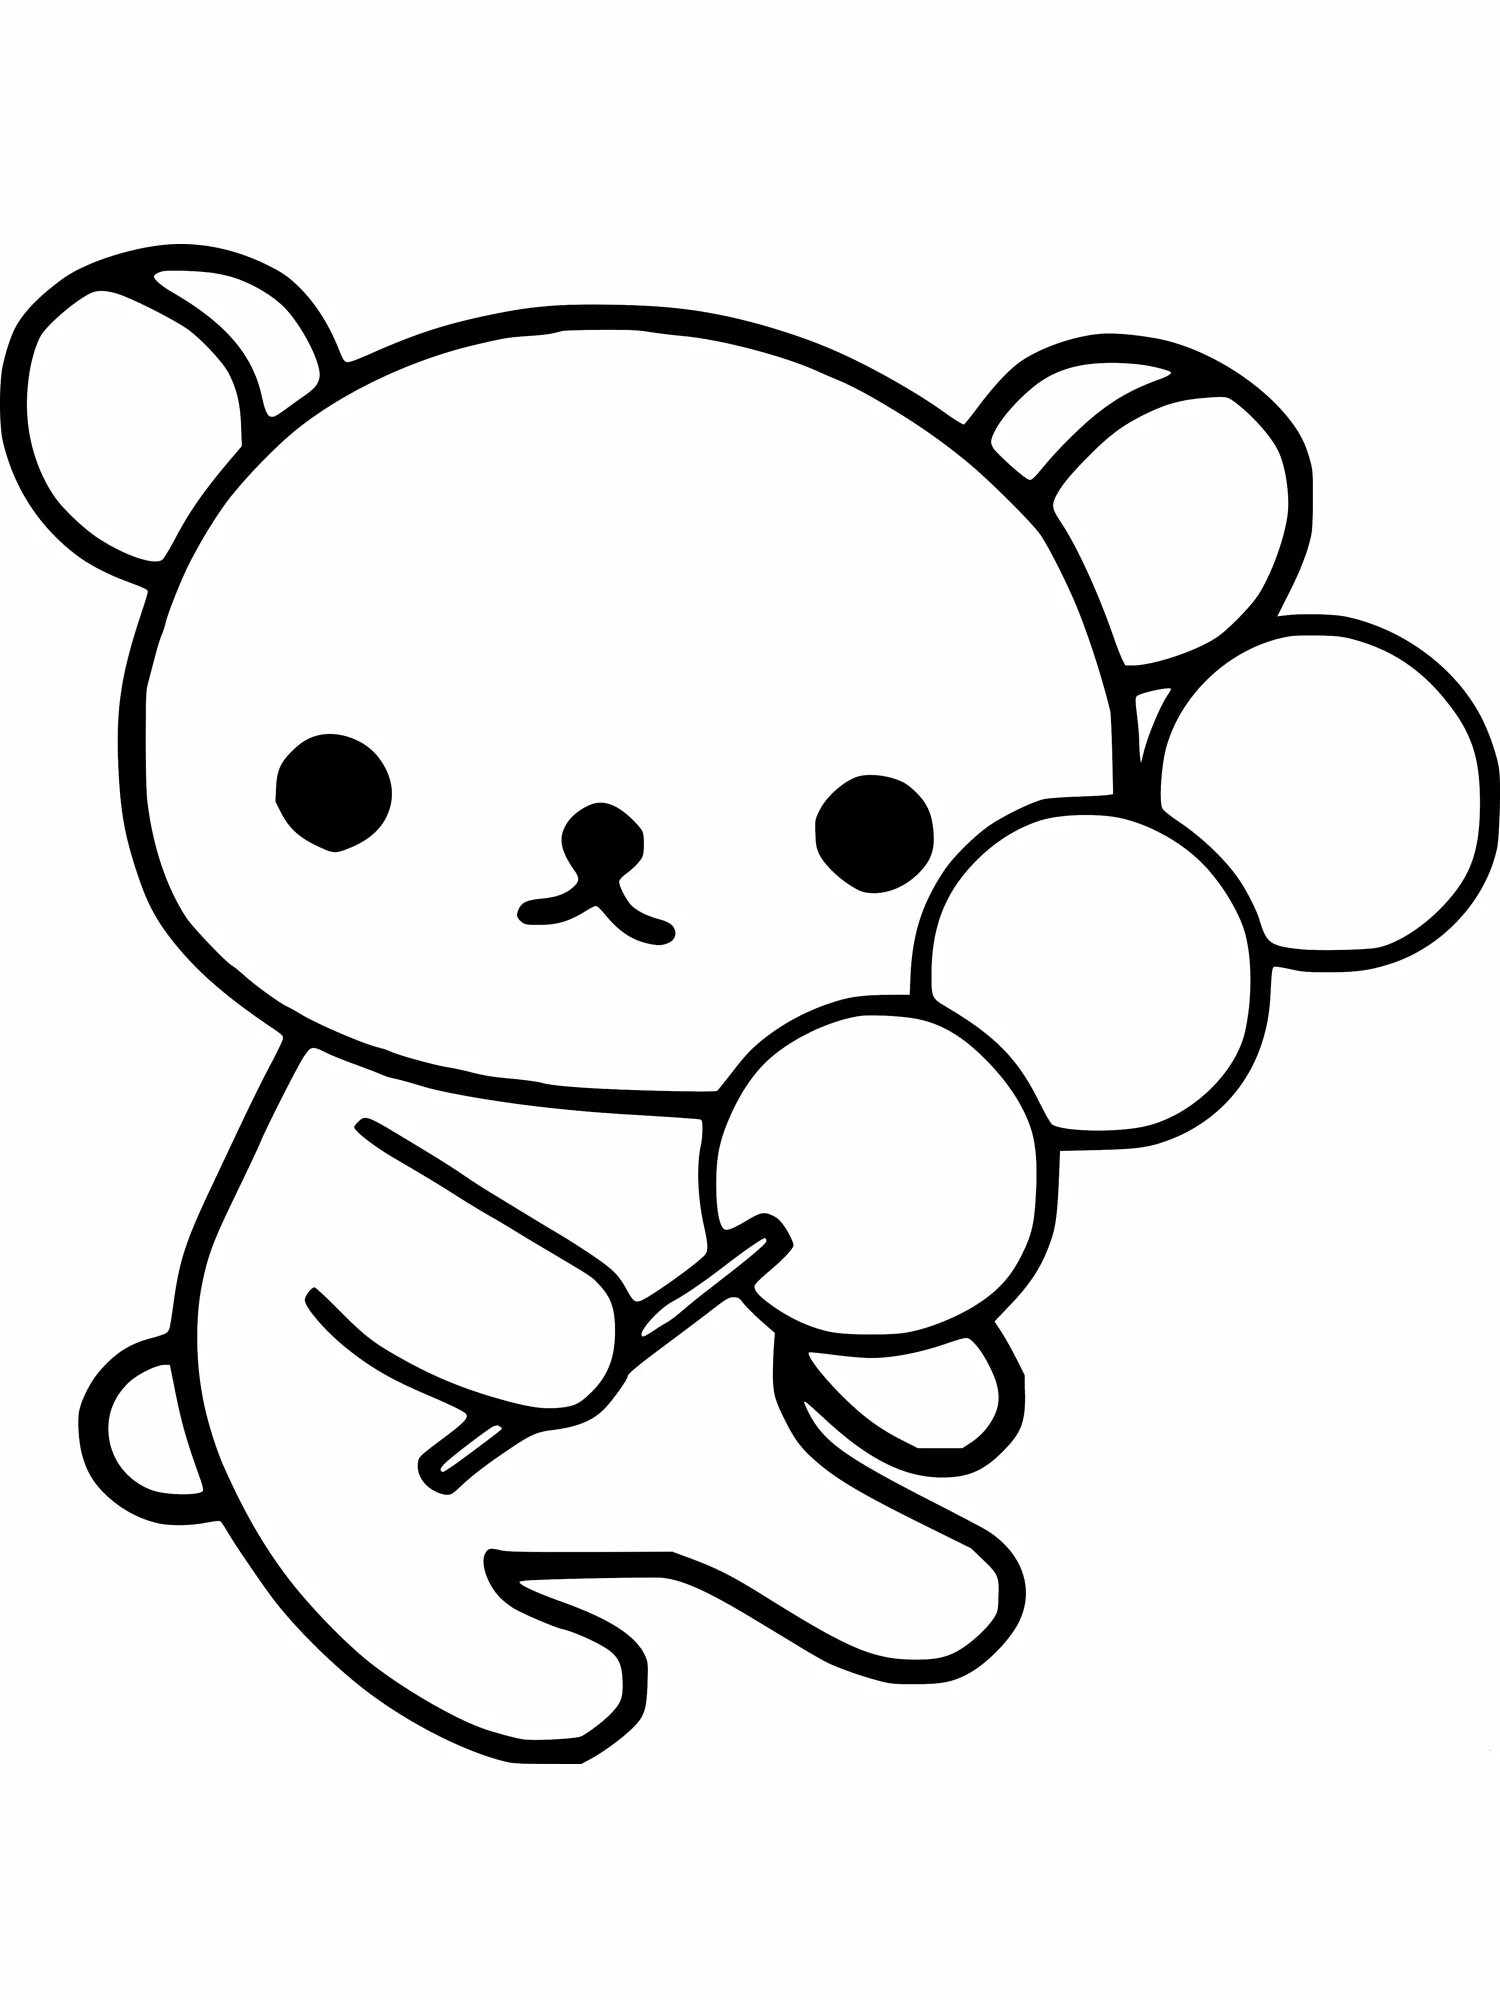 Colorful and adorable teddy bear coloring book